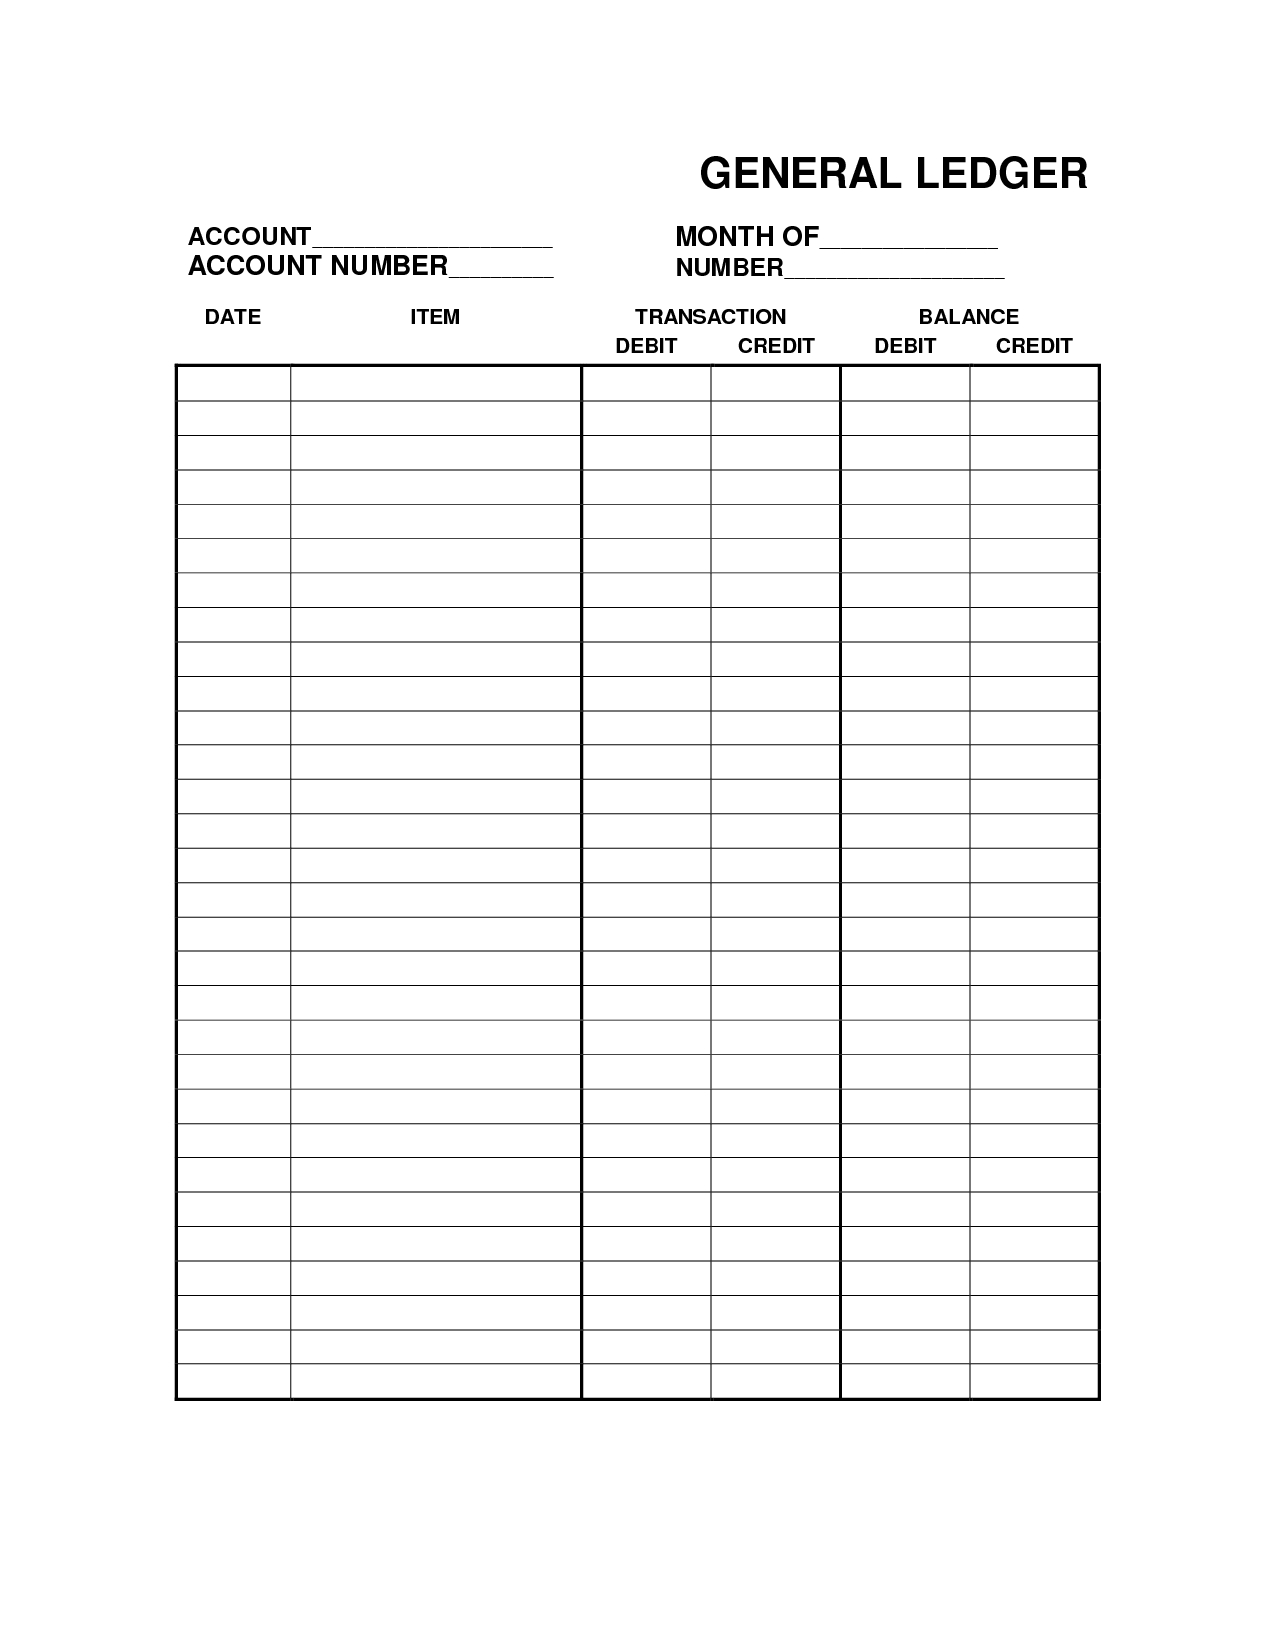 Free Printable Bookkeeping Sheets | General Ledger Free Office Form ... Together With Blank Trial Balance Sheet